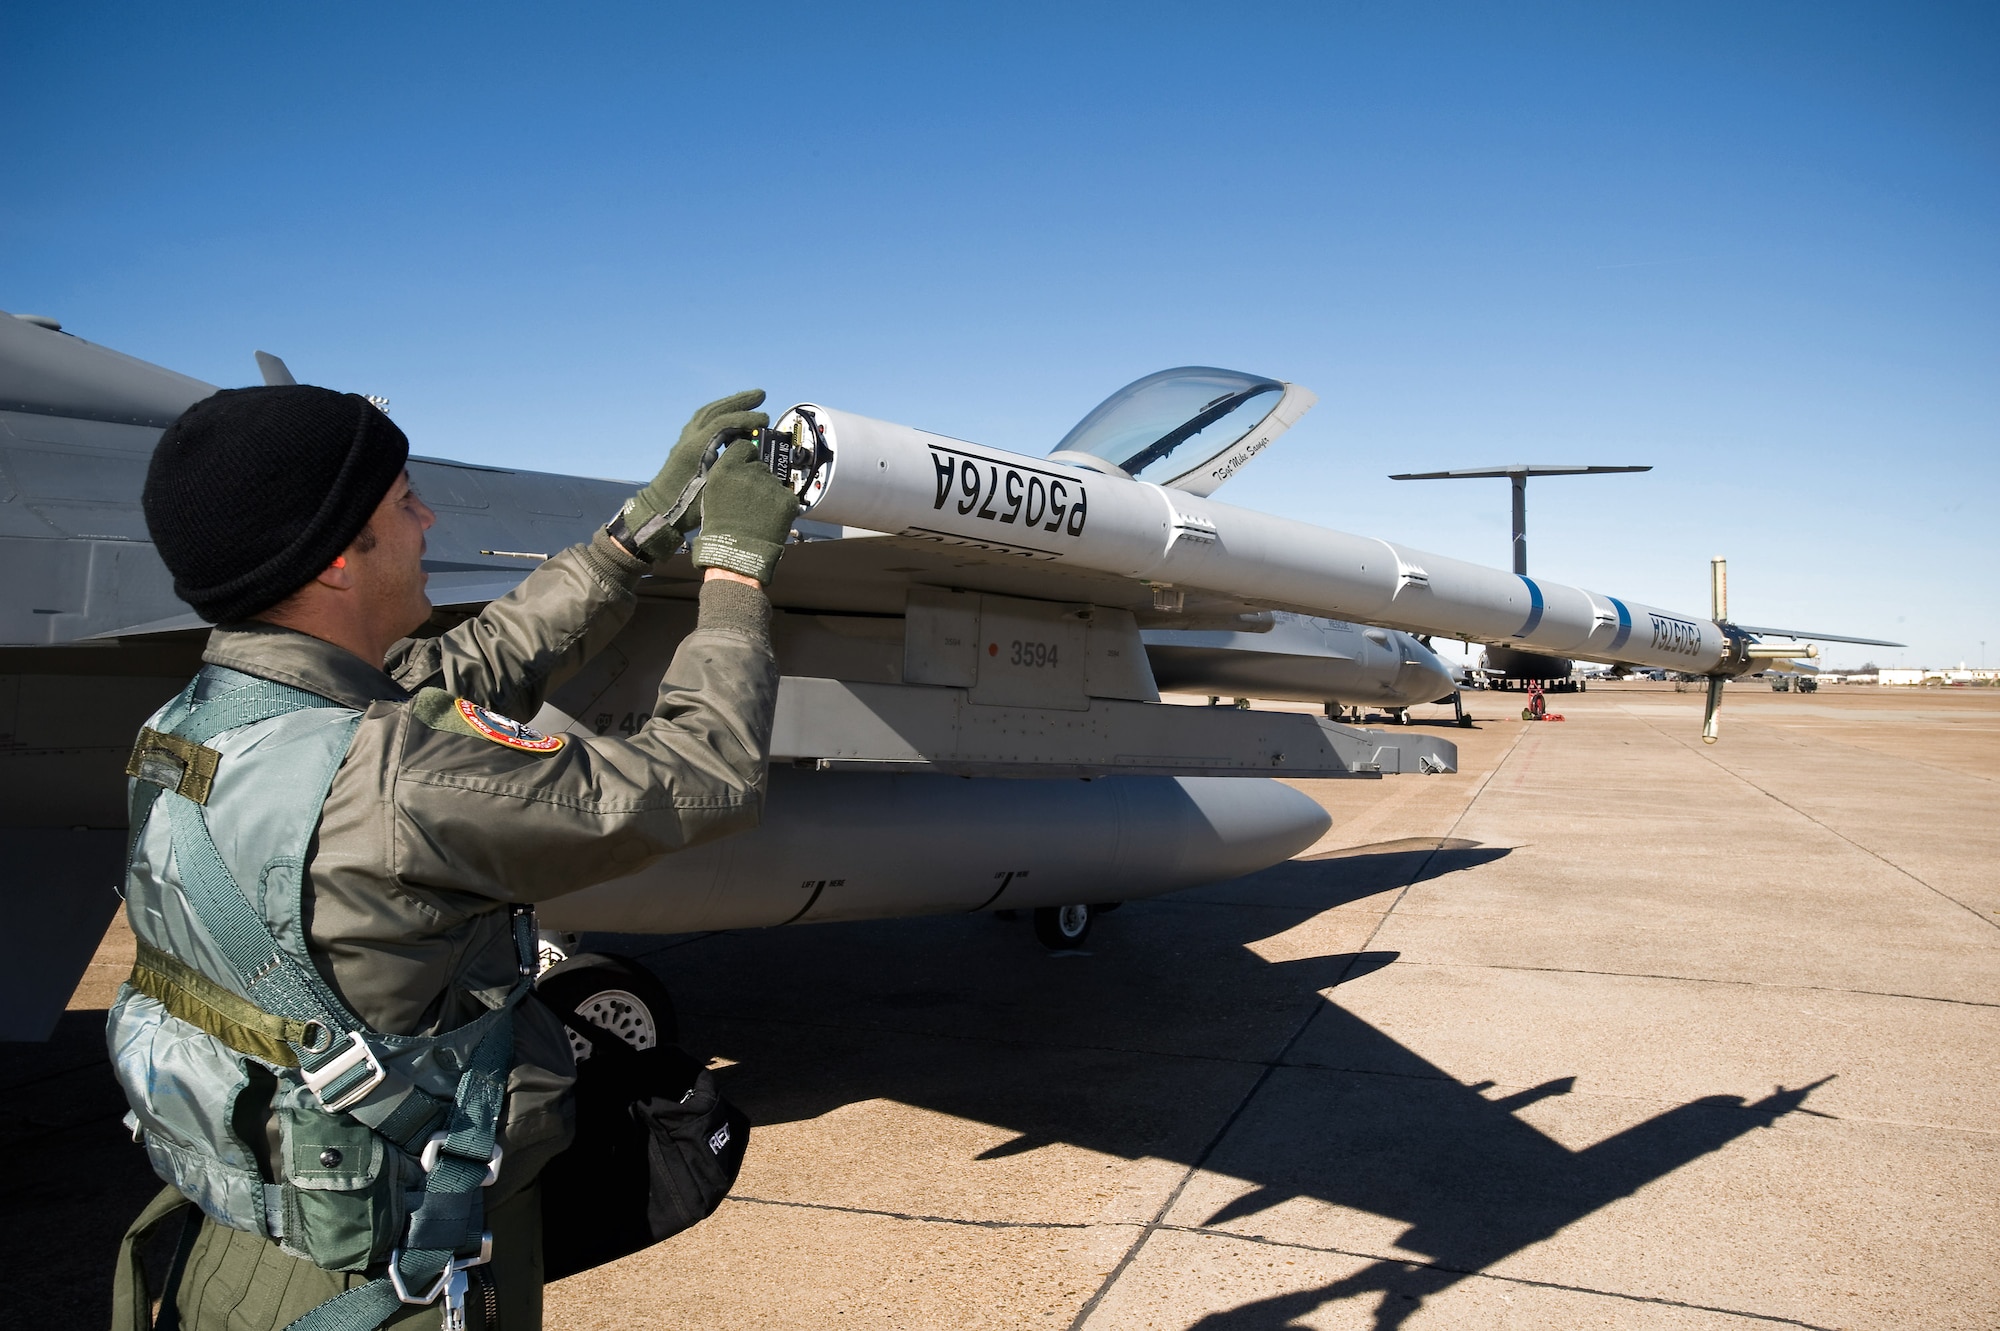 Lt. Col. Mitch Neff loads a data recording device into the air combat maneuvering instrumentation pod on an F-16 Fighting Falcon Dec. 4 at Green Flag East at Barksdale Air Force Base, La. The ACMI pods are being used on the F-16s to provide real-time 3-D flight data to the battlefield commander. Colonel Neff is a Colorado Air National Guard pilot with the 120th Fighter Squadron from Buckley AFB, Colo. (U.S. Air Force photo/Master Sgt. John Nimmo Sr.) 